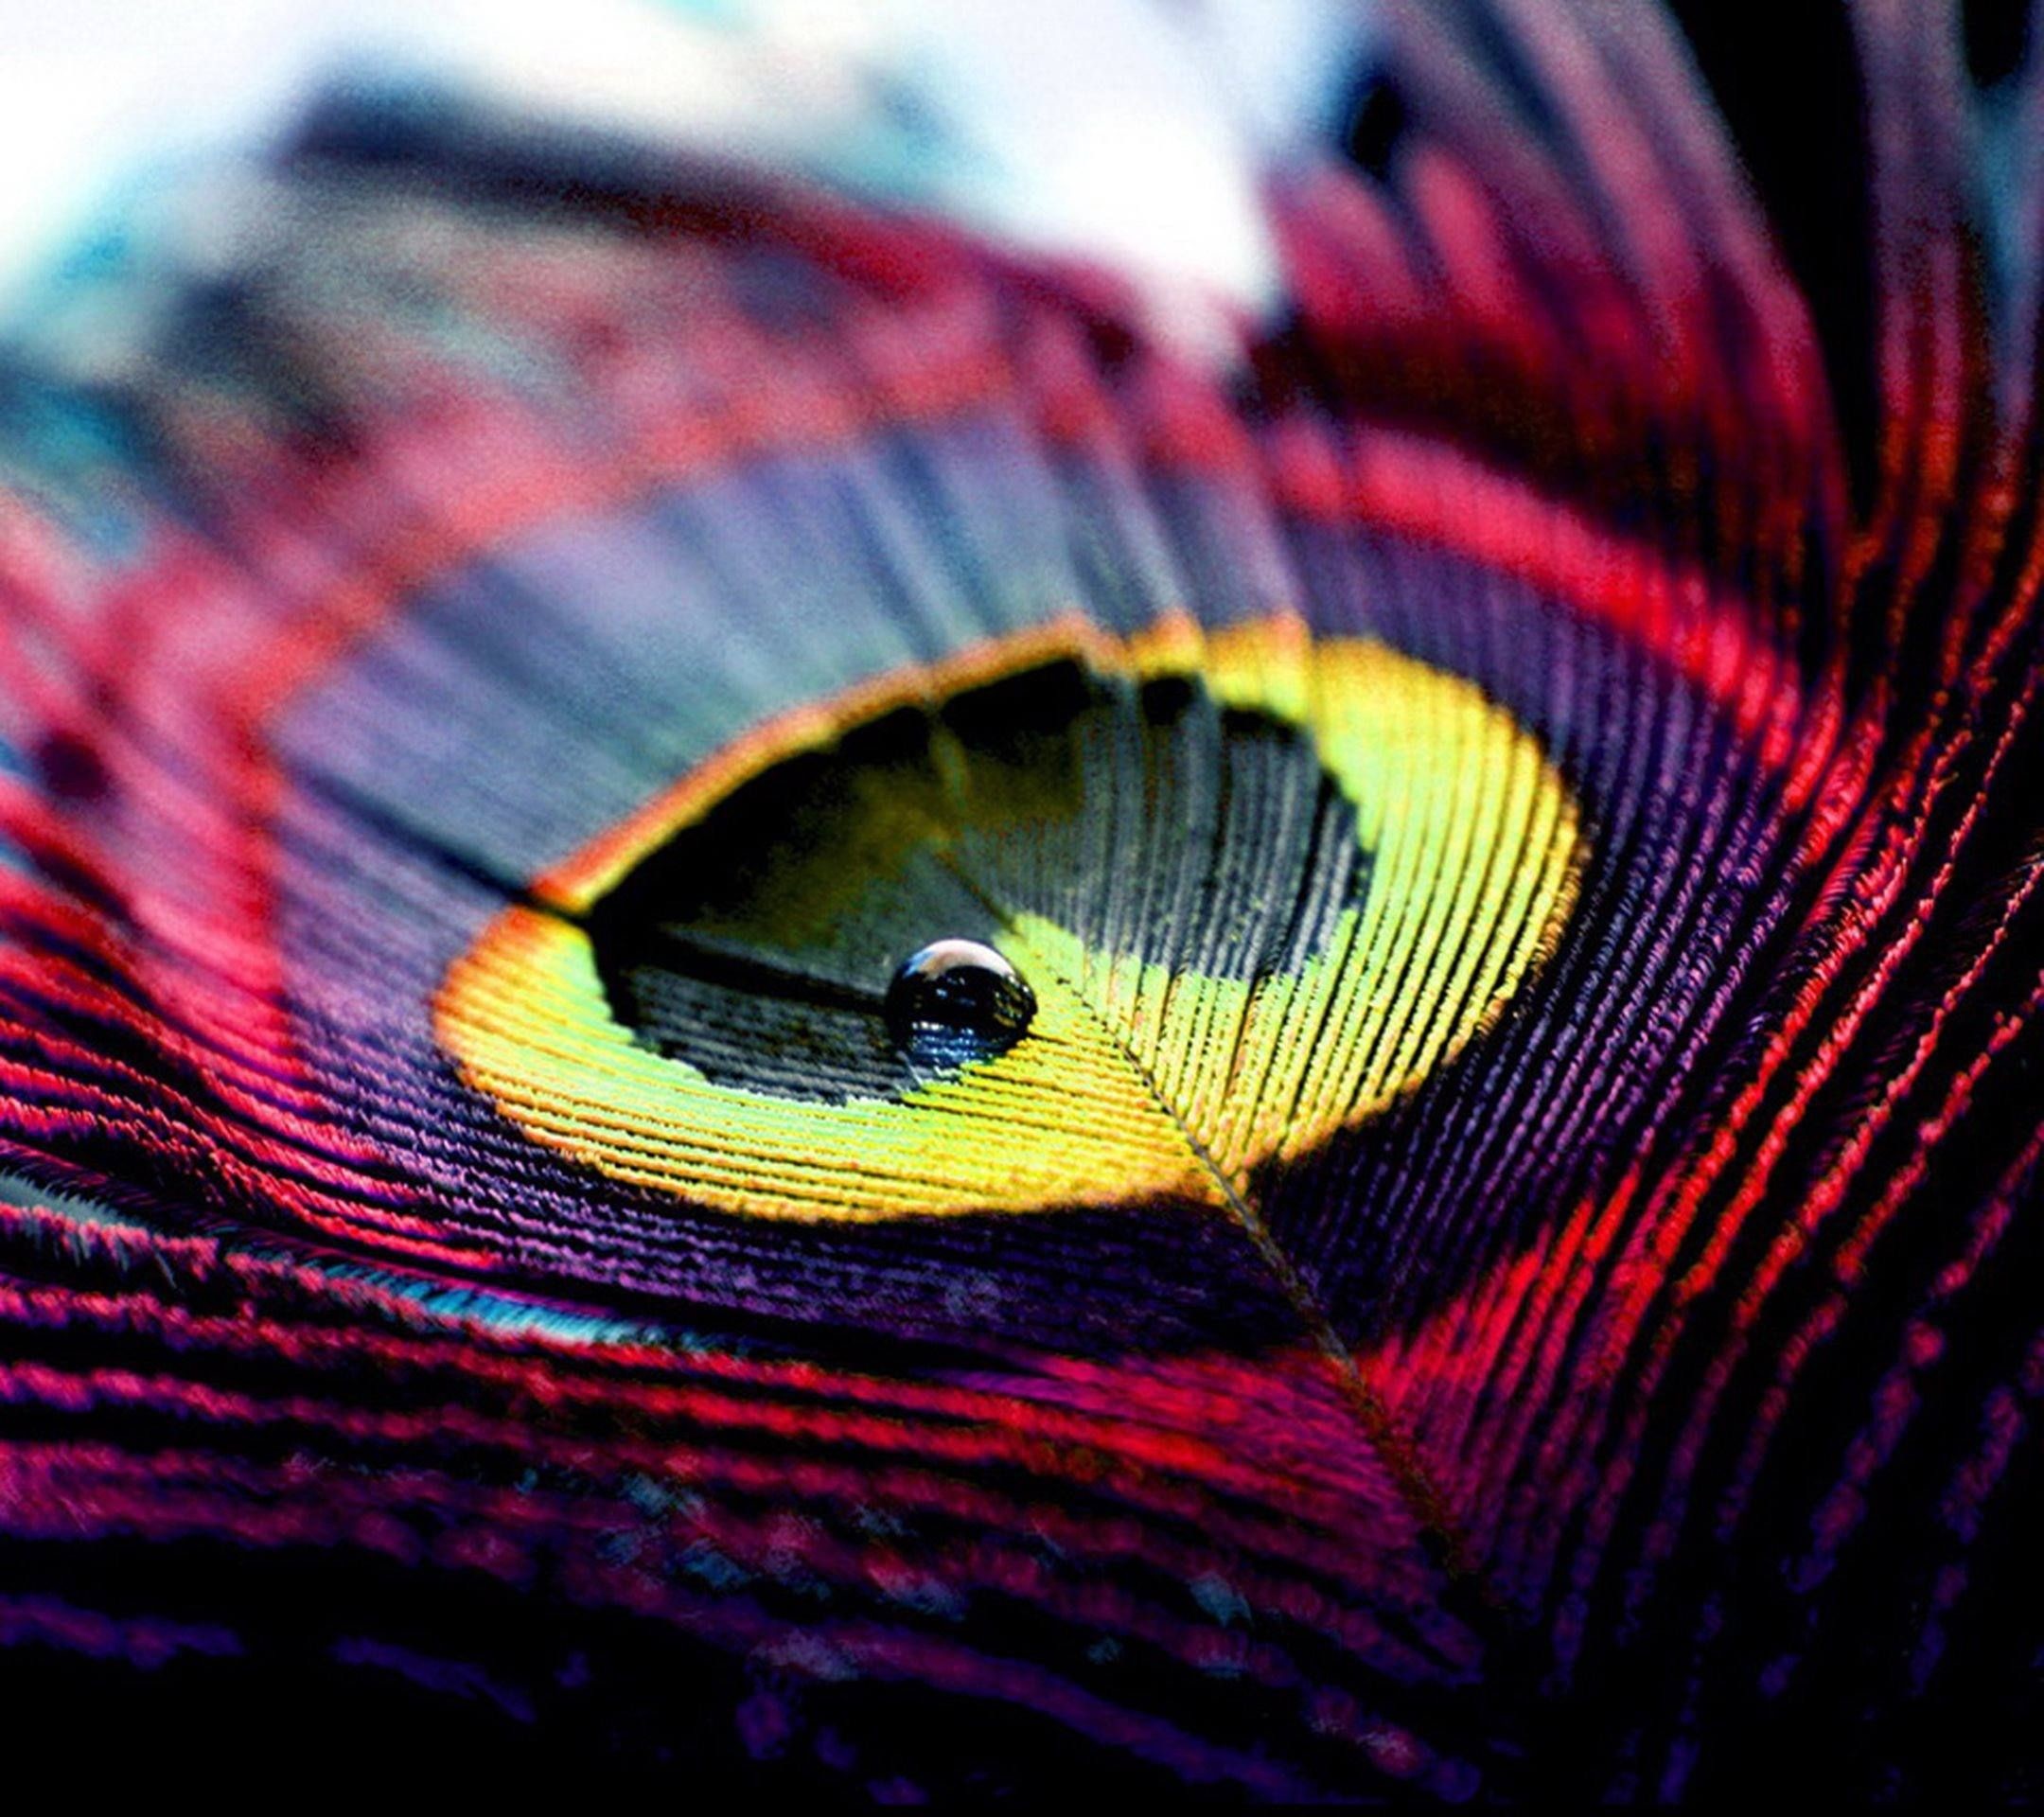 2160x1920, Single Peacock Feathers Wallpaper - Peacock Feather Wallpaper Hd - HD Wallpaper 